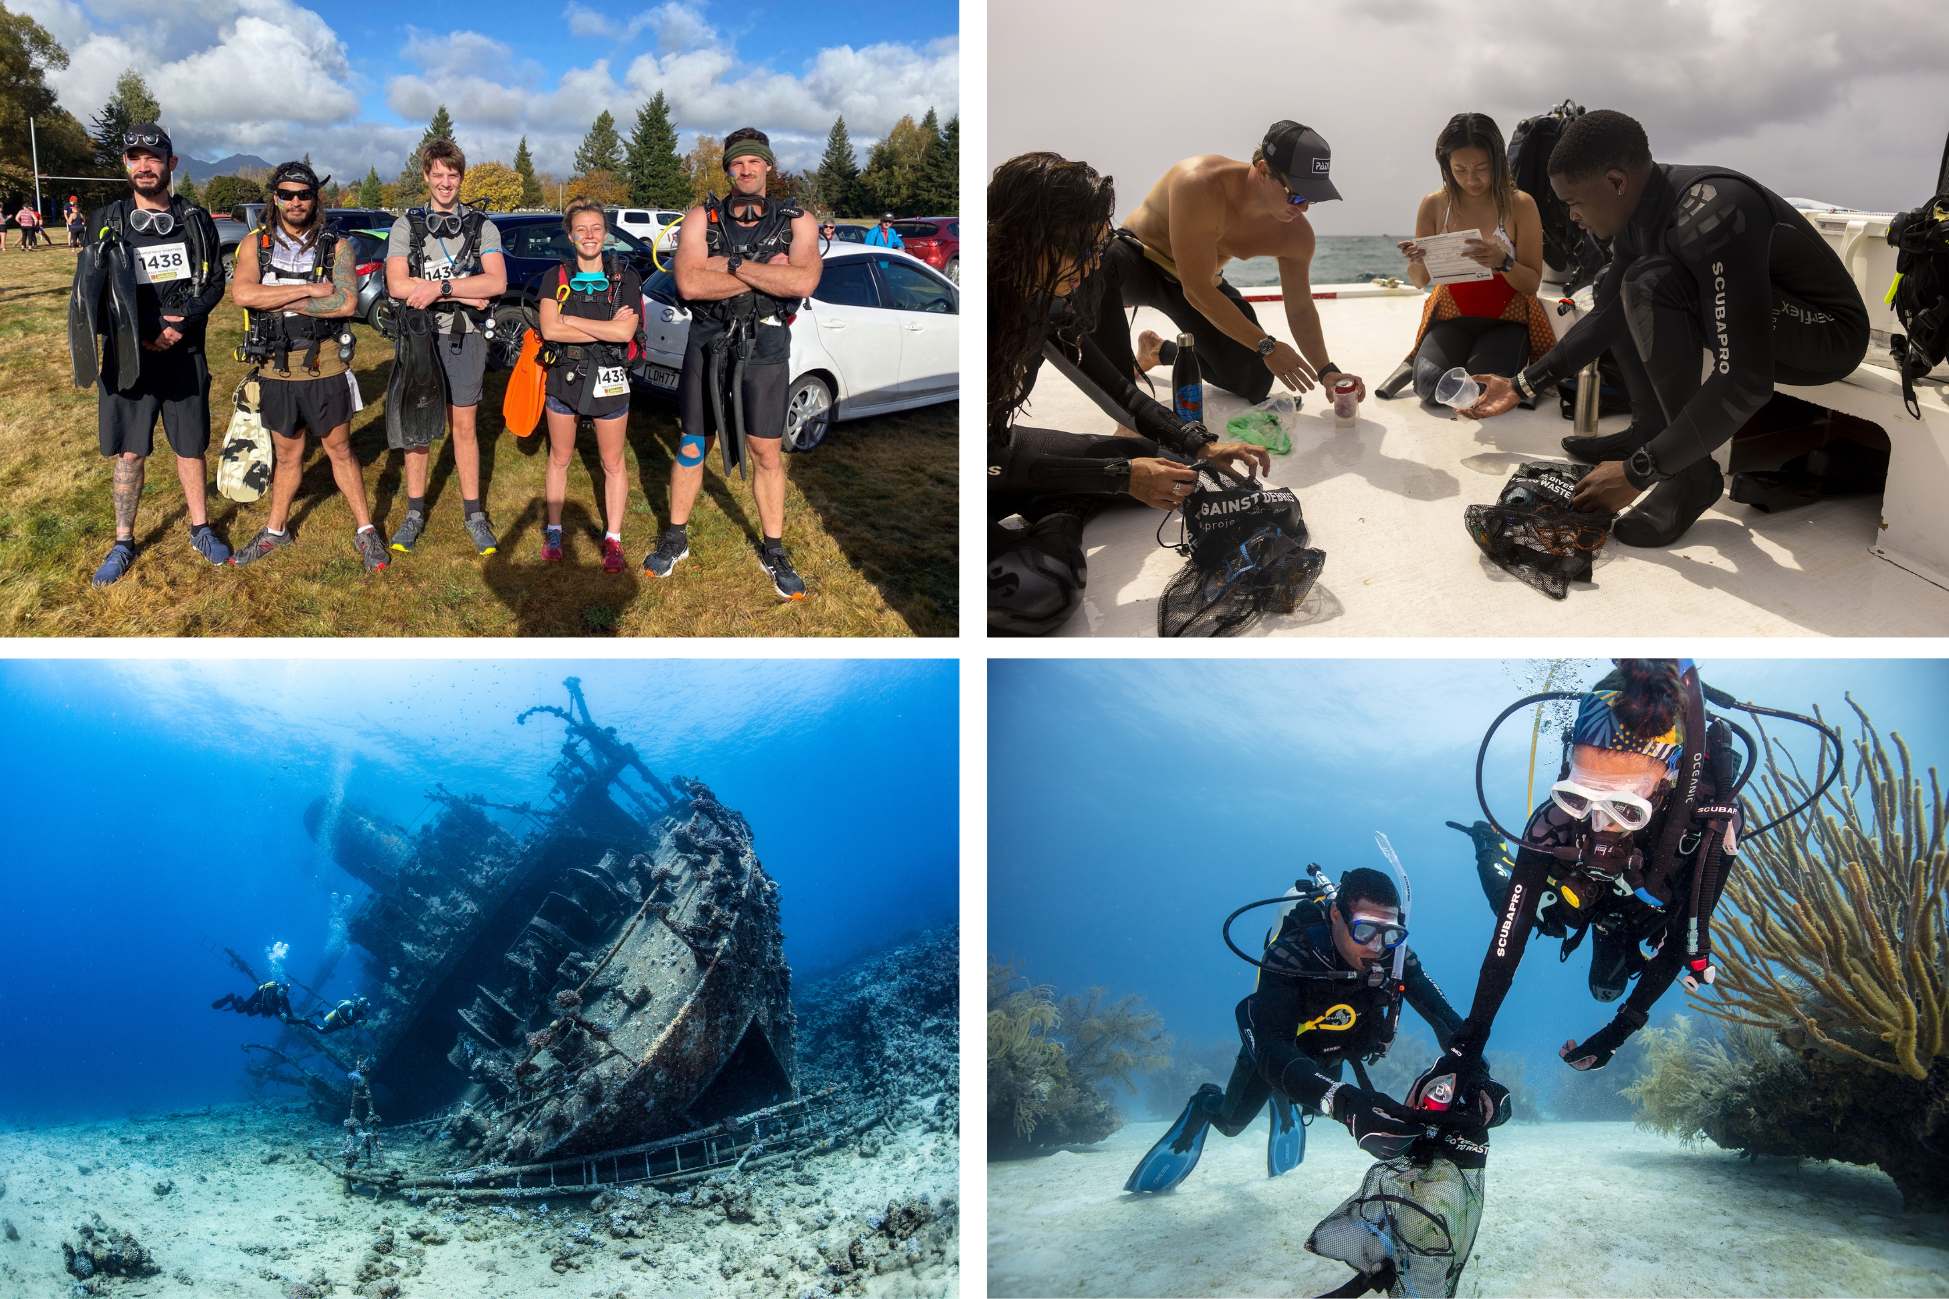 4 images showing scuba divers taking conservation actions above and below the surface